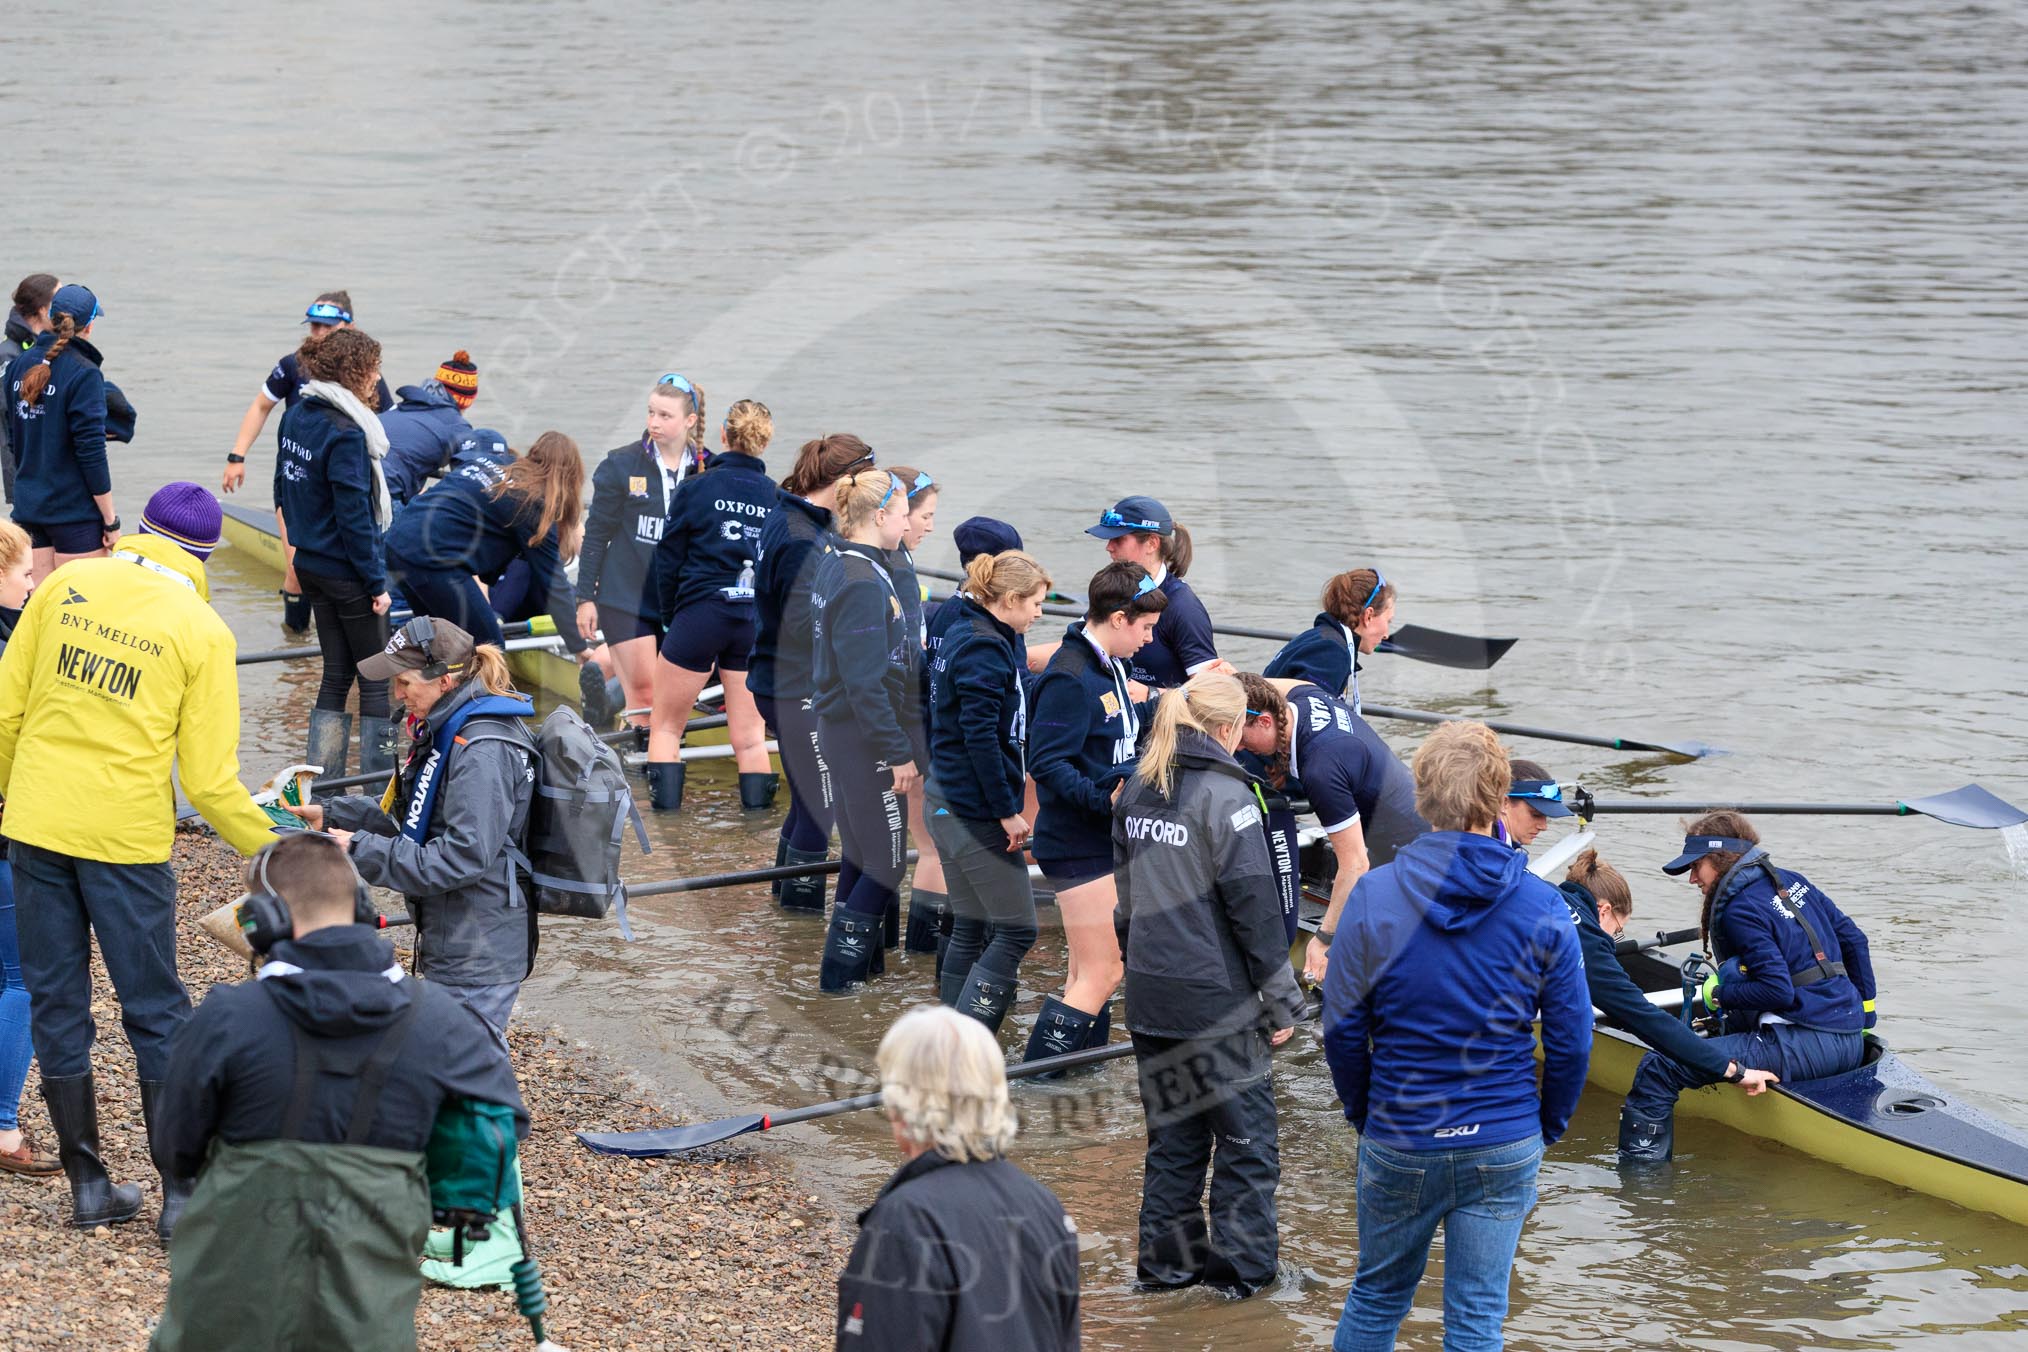 The Cancer Research UK Women's Boat Race 2018: The Oxford reserve boat, also beaten by Cambridge, arrives at Mortlake Boat Club - bow Matlida Edwards, 2 Laura Depner, 3 Madeline Goss, 4 Rachel Anderson, 5 Sarah Payne Riches, 6 Sanja Brolih, 7 Olivia Pryer, stroke Anna Murgatroyd, cox Eleanor Shearer.
River Thames between Putney Bridge and Mortlake,
London SW15,

United Kingdom,
on 24 March 2018 at 17:12, image #312